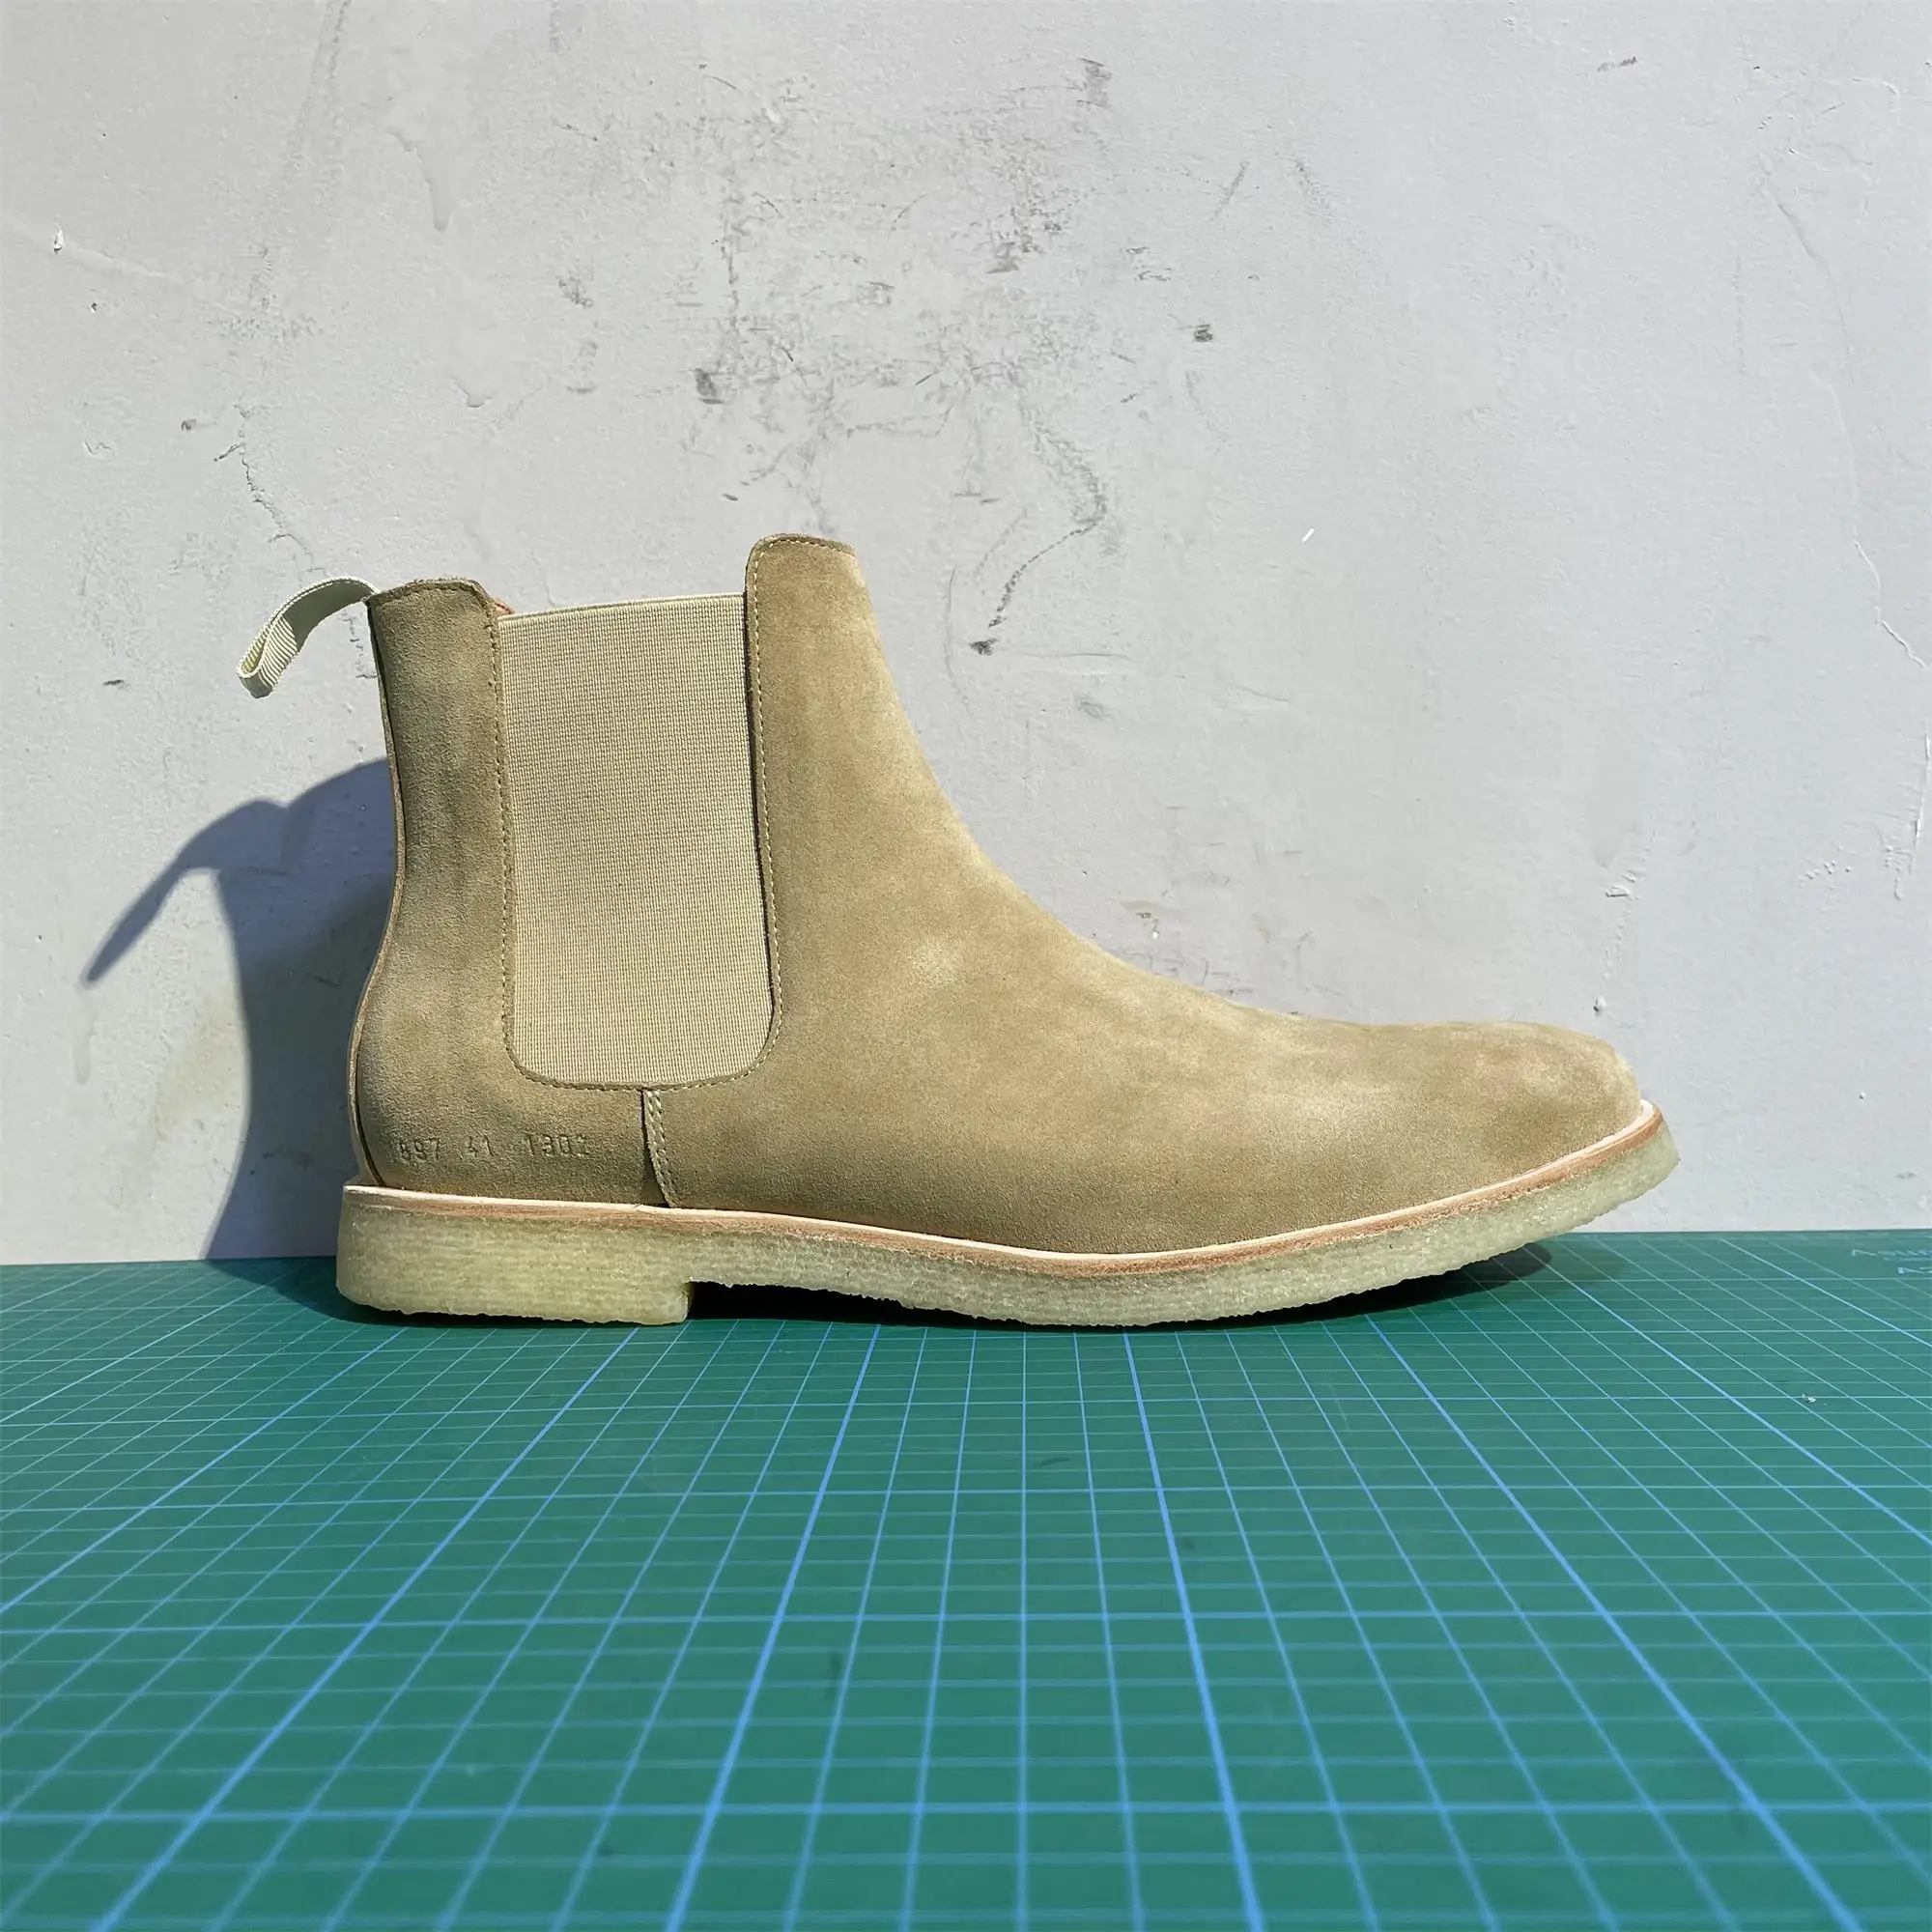 

DONNAIN Classic Luxury Cow Suede Leather Chelsea Boots Women Man Slip-On Crep Sole Top Quality Ankle Couple Boots Handmade